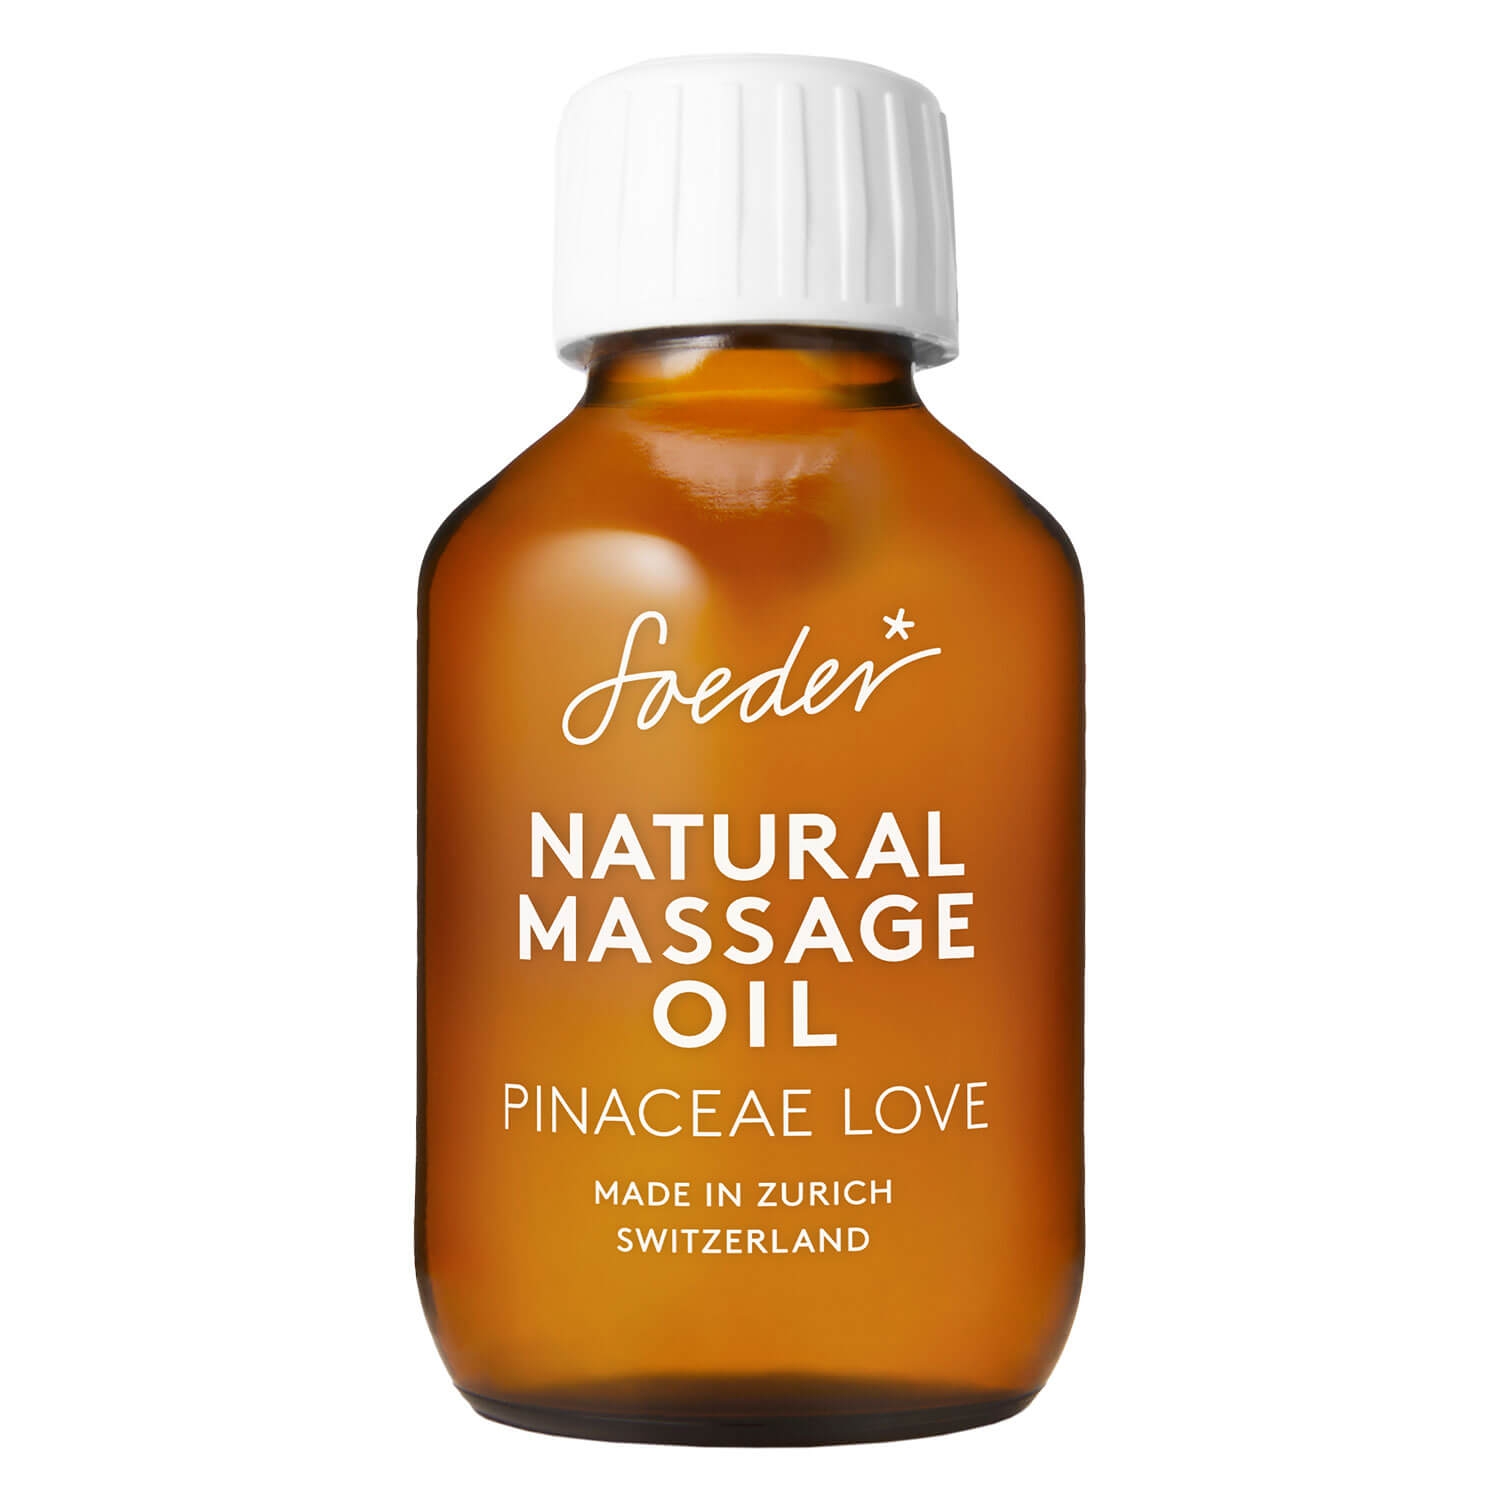 Product image from Soeder - Natural Massage Oil Pinaceae Love